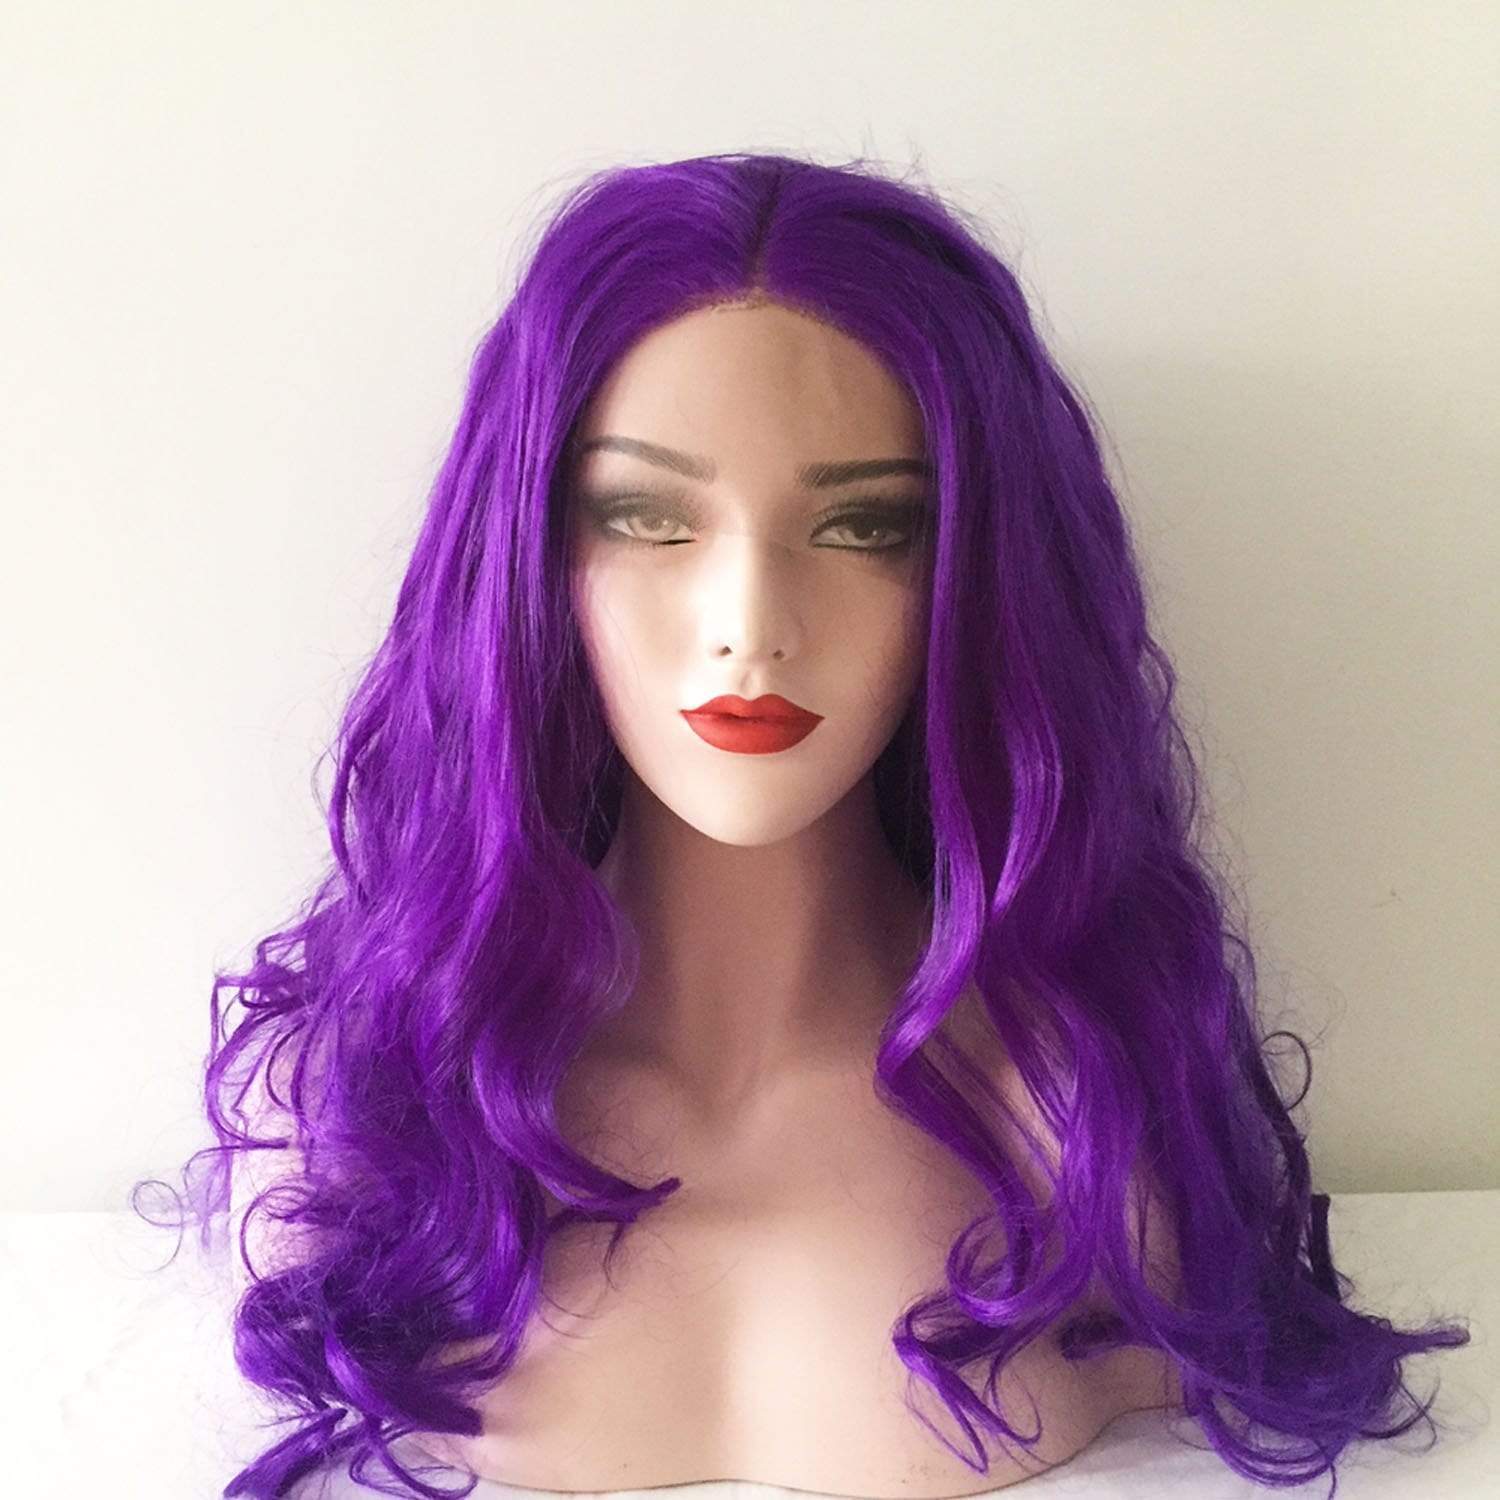 nevermindyrhead Women Purple Lace Front Long Curly Middle Part Wig